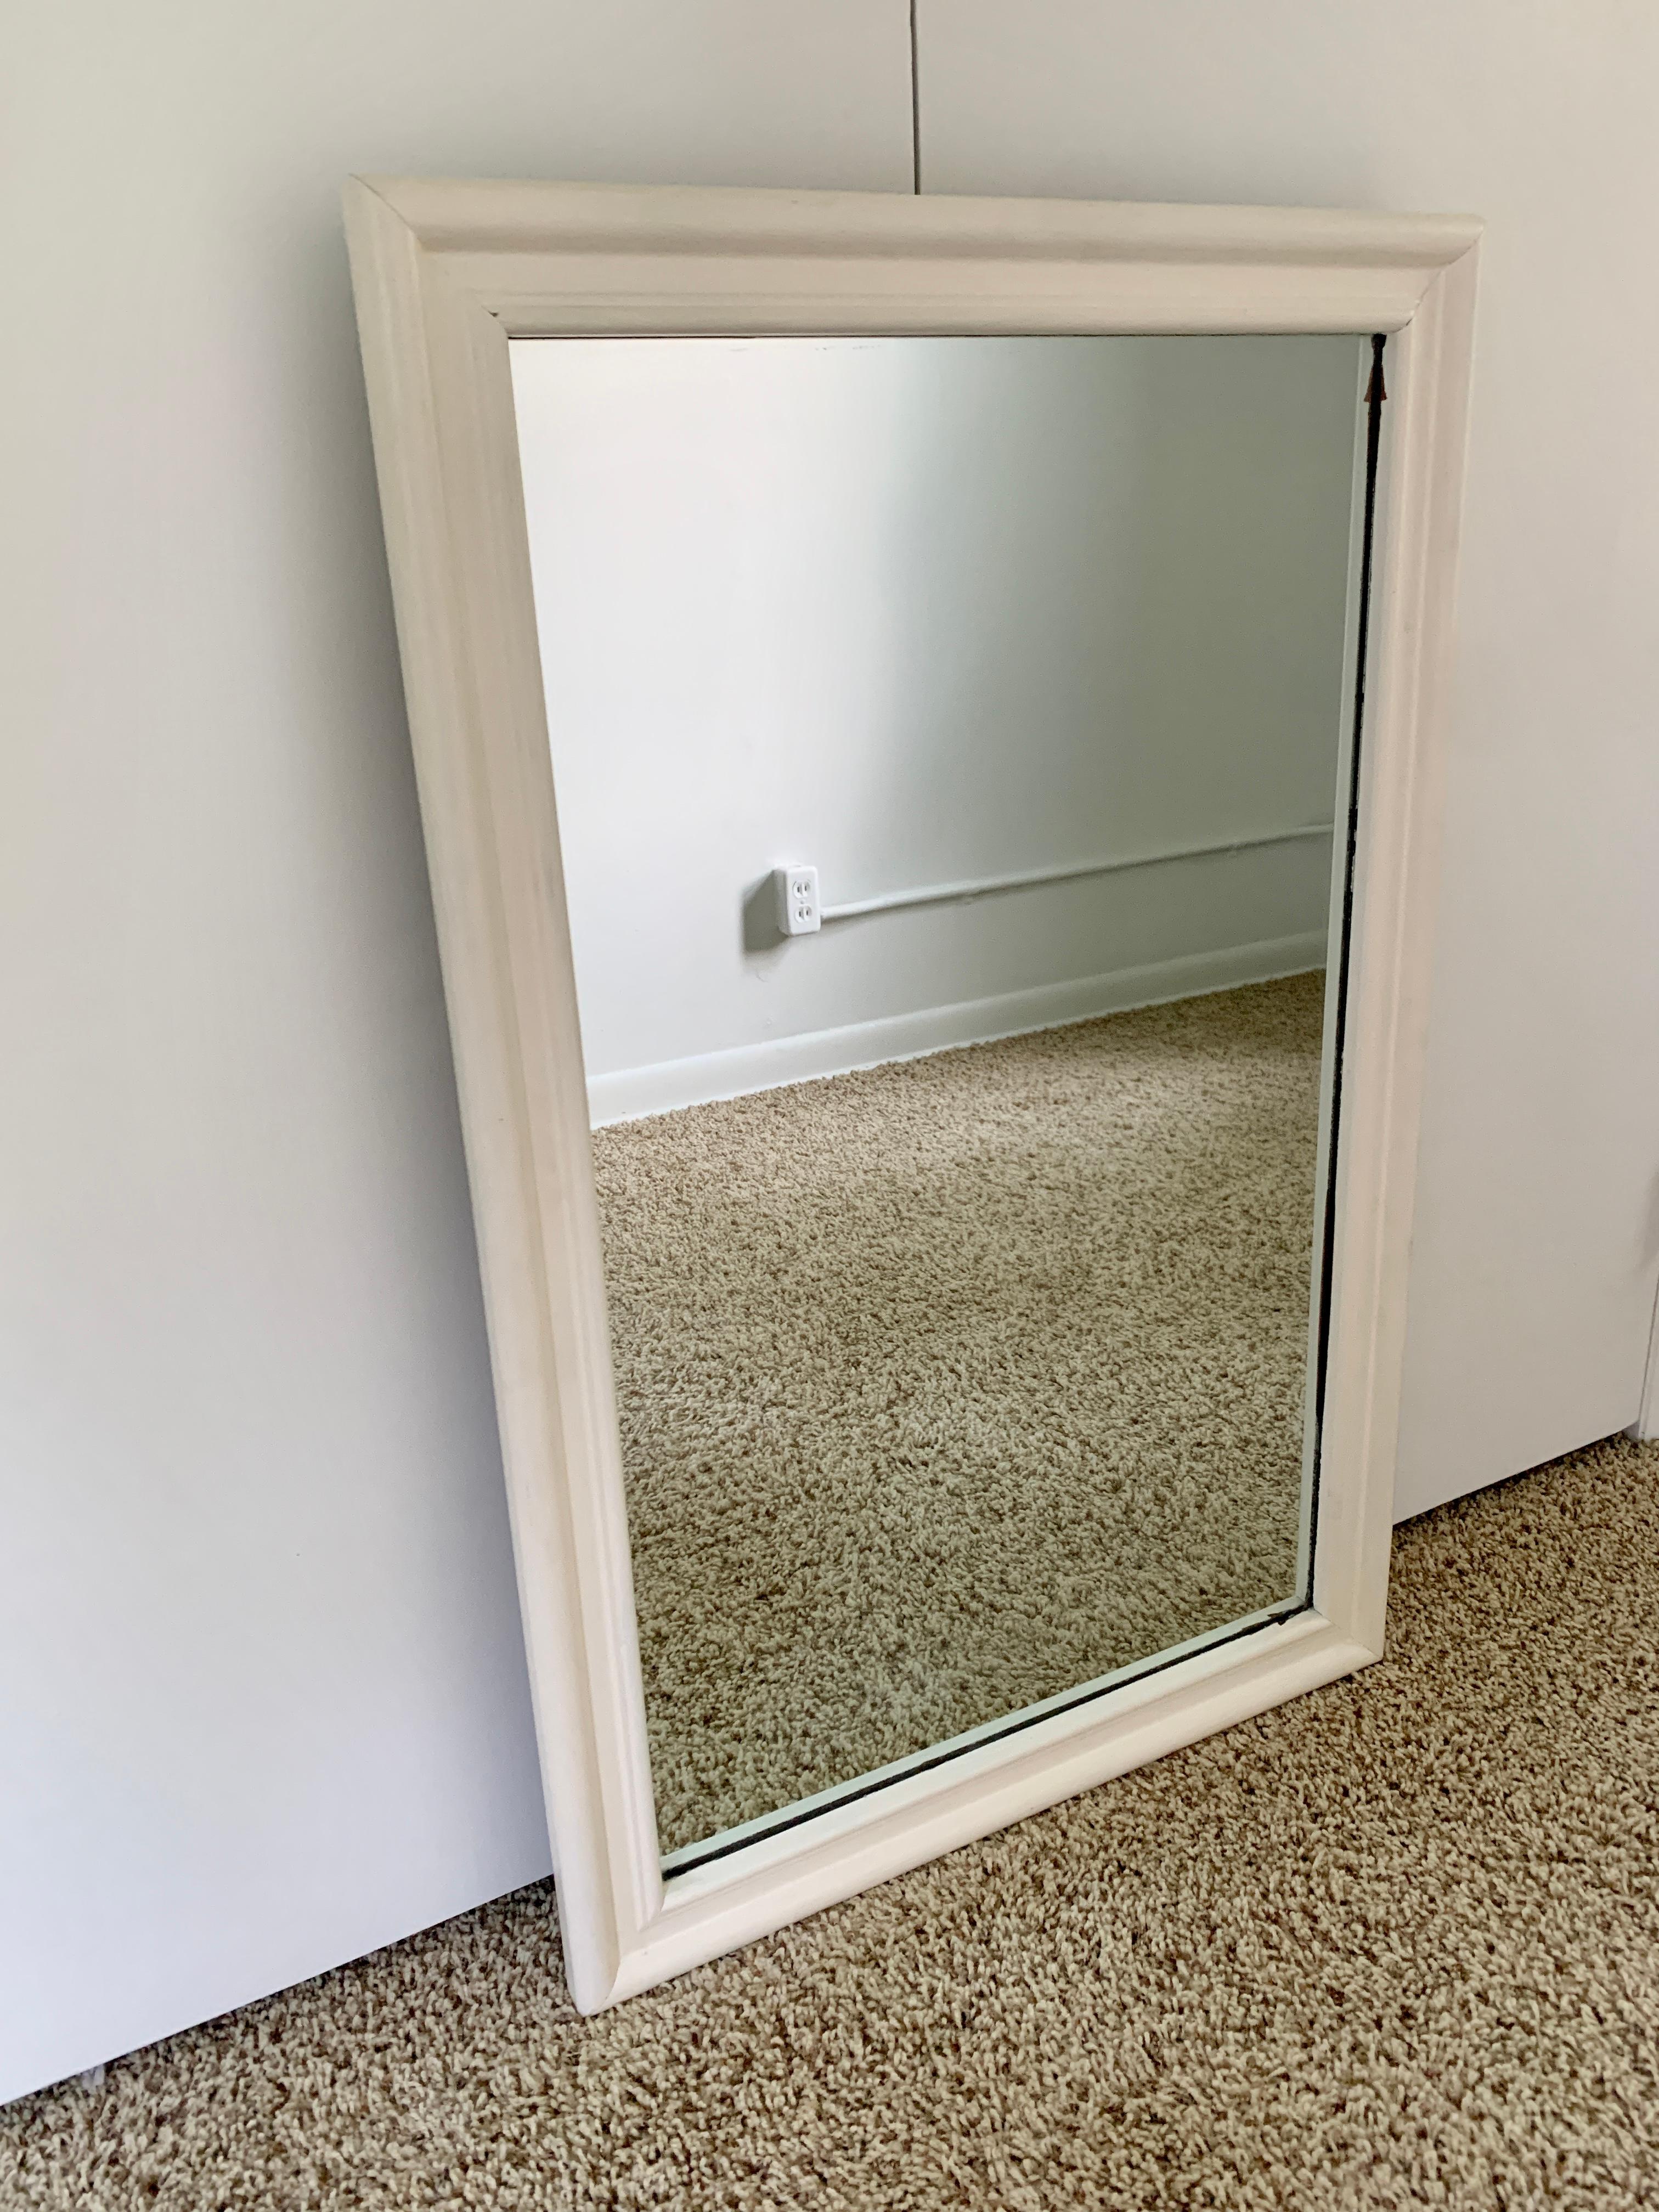 A gorgeous contemporary wall mirror with painted white frame

USA, late 20th century

Measures: 26.5